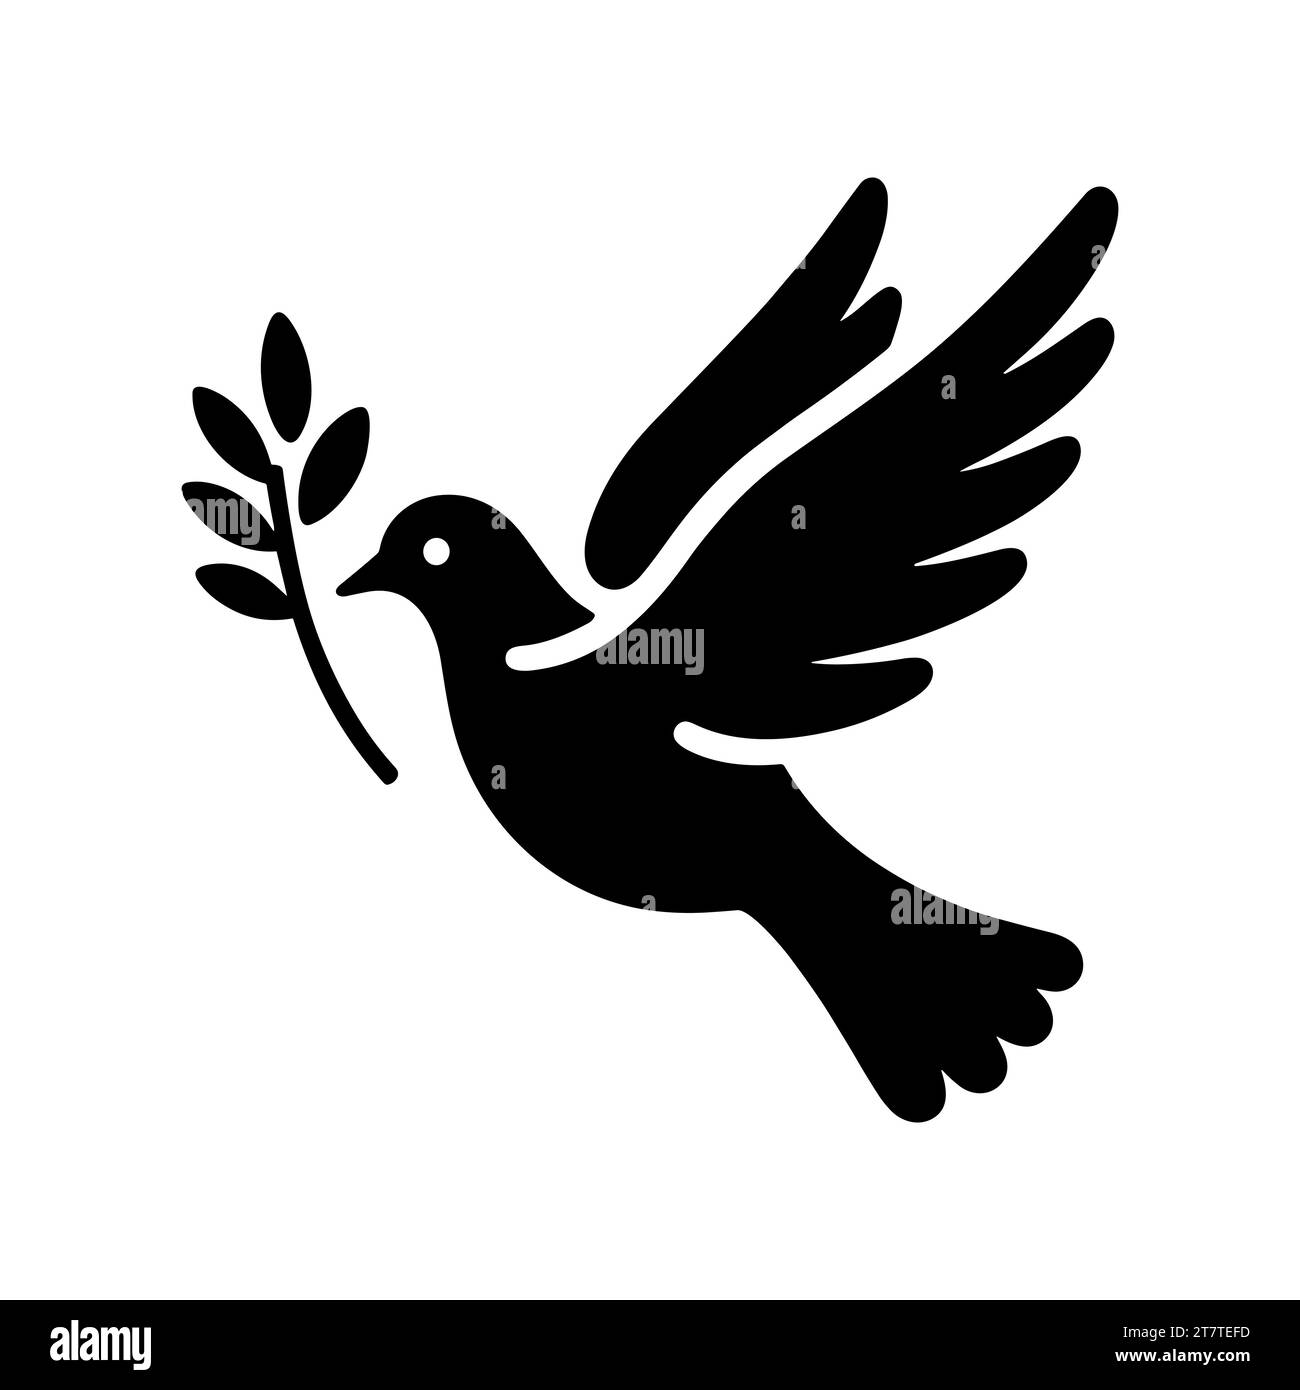 Dove icon. Black silhouette of a dove in flight carrying an olive branch on a white background. Peace symbol. Religious icon. Vector illustration. Stock Vector